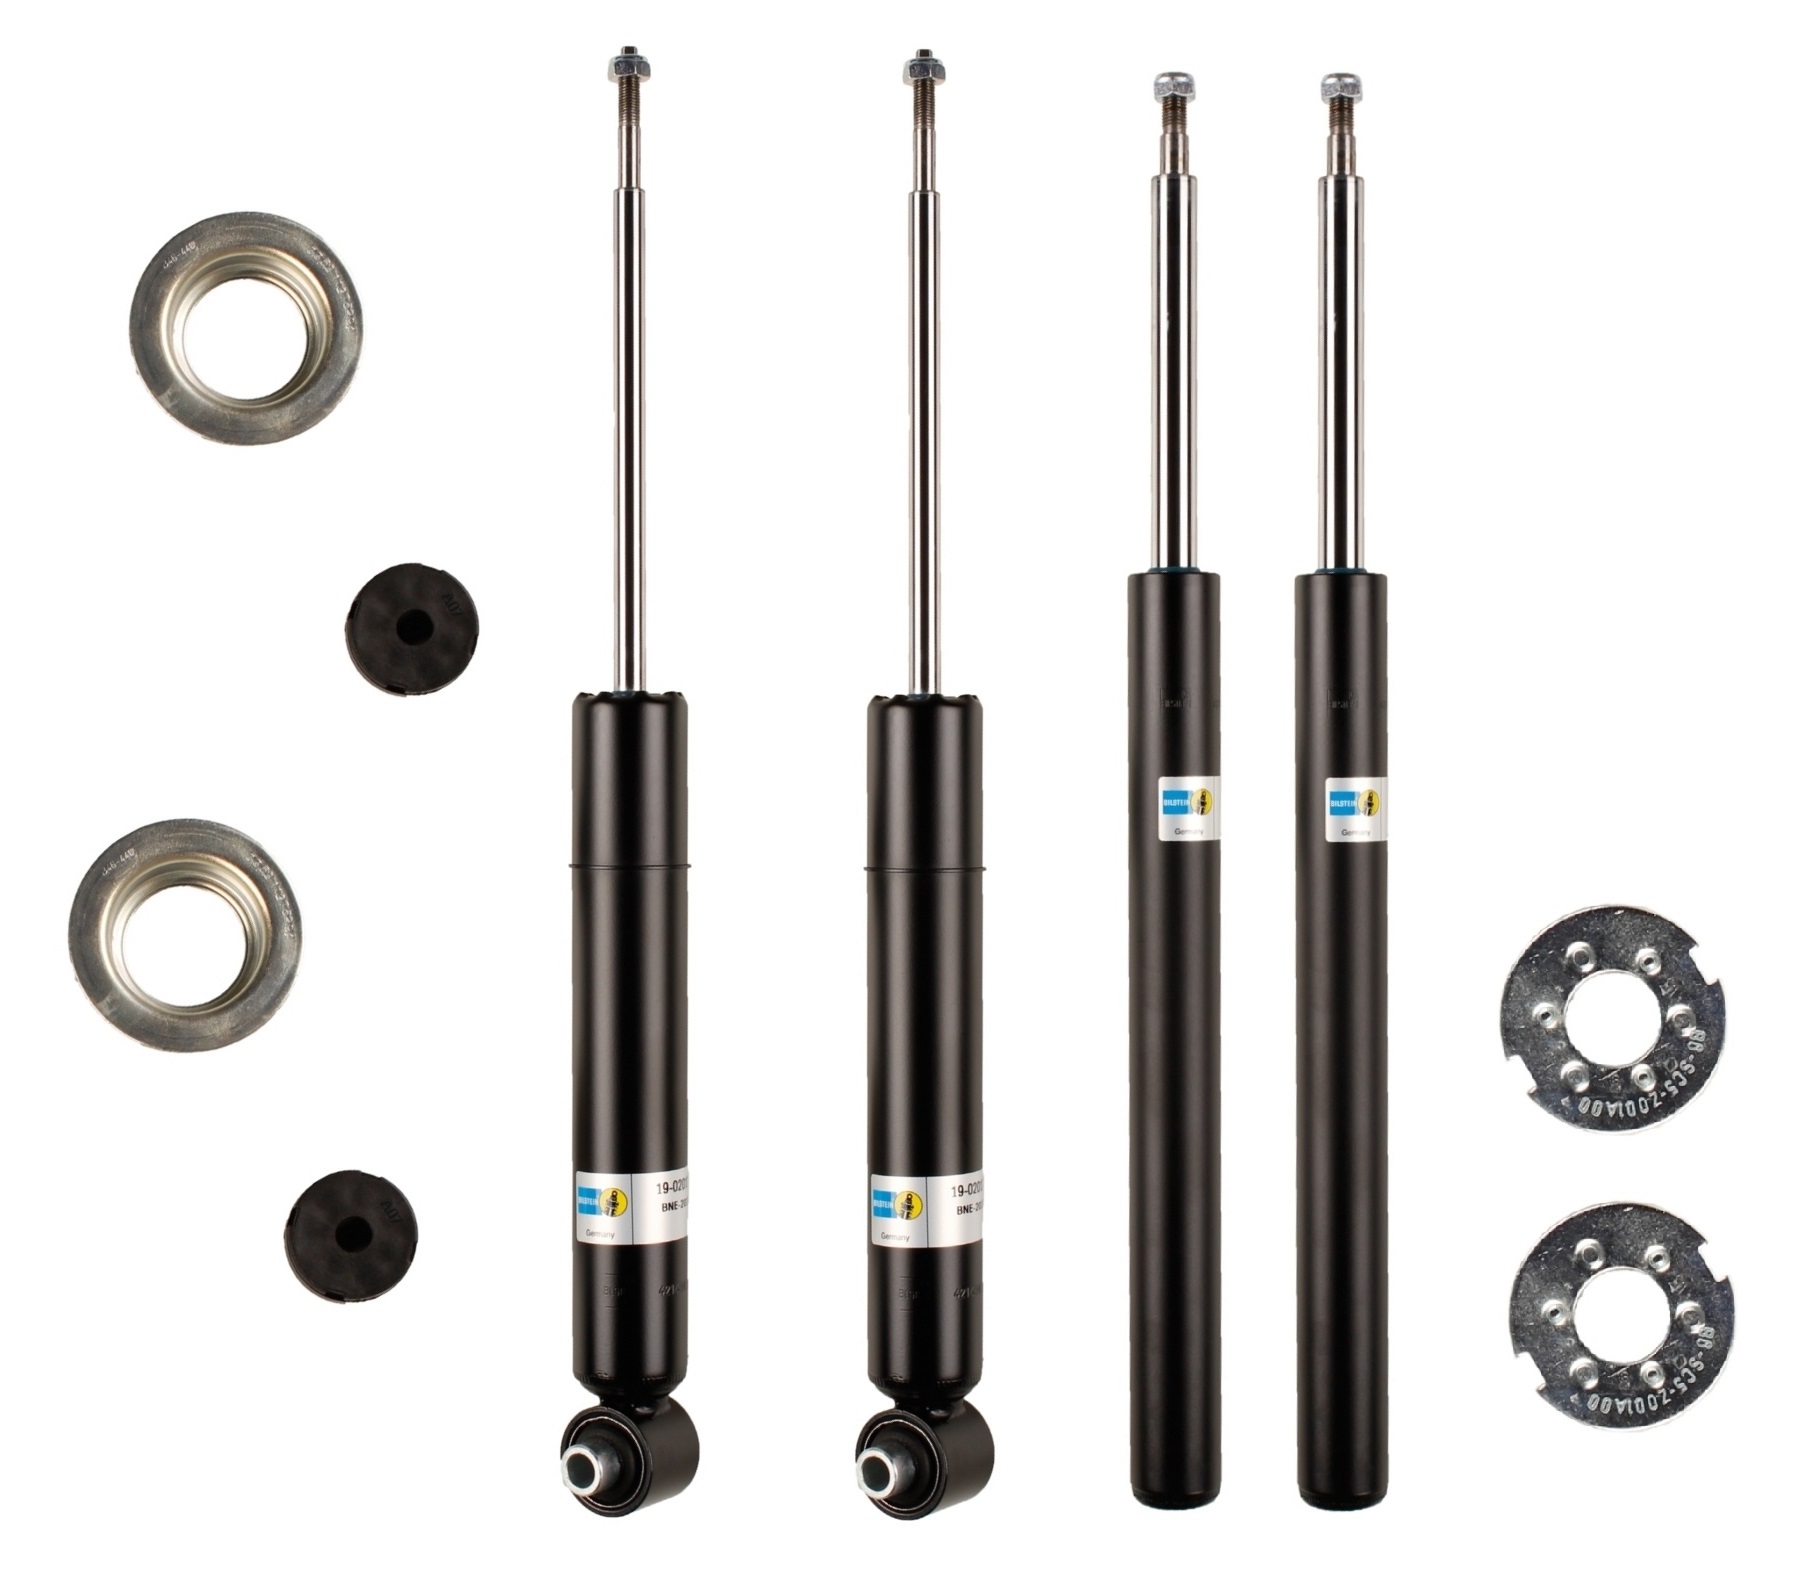 4x Bilstein B4 Front & Rear Shock Absorbers set For BMW 5 (E28) 81-87 520 i 21-030512, 19-020174